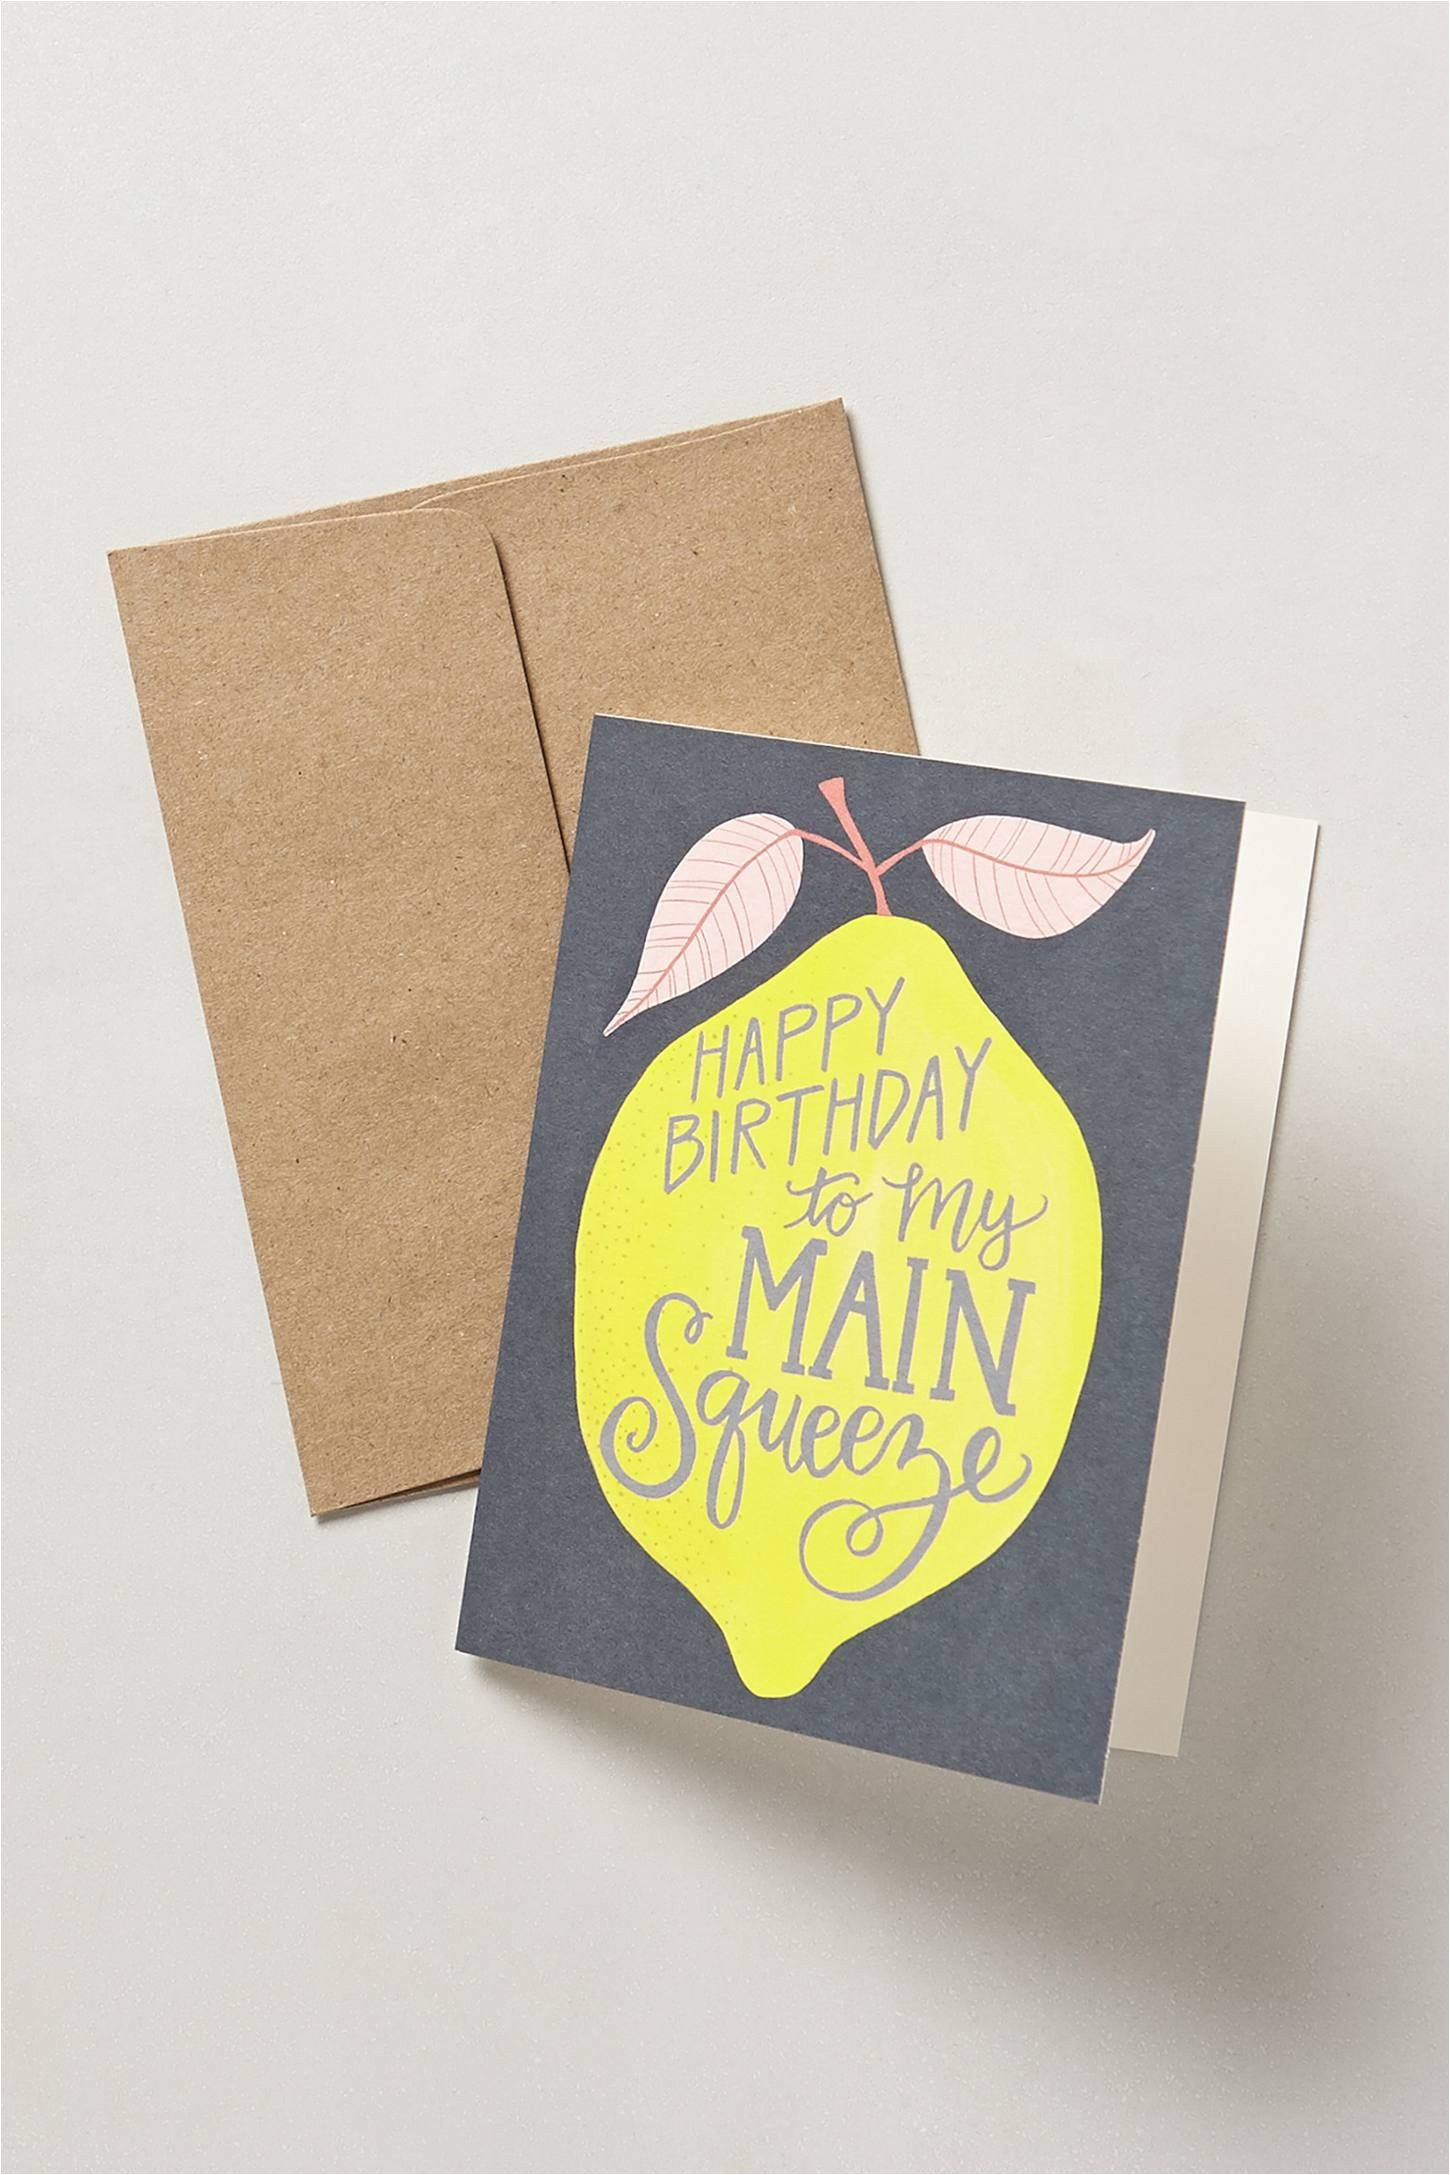 Creative Idea for Birthday Card 10 Bright Colorful Birthday Cards to Send This Month